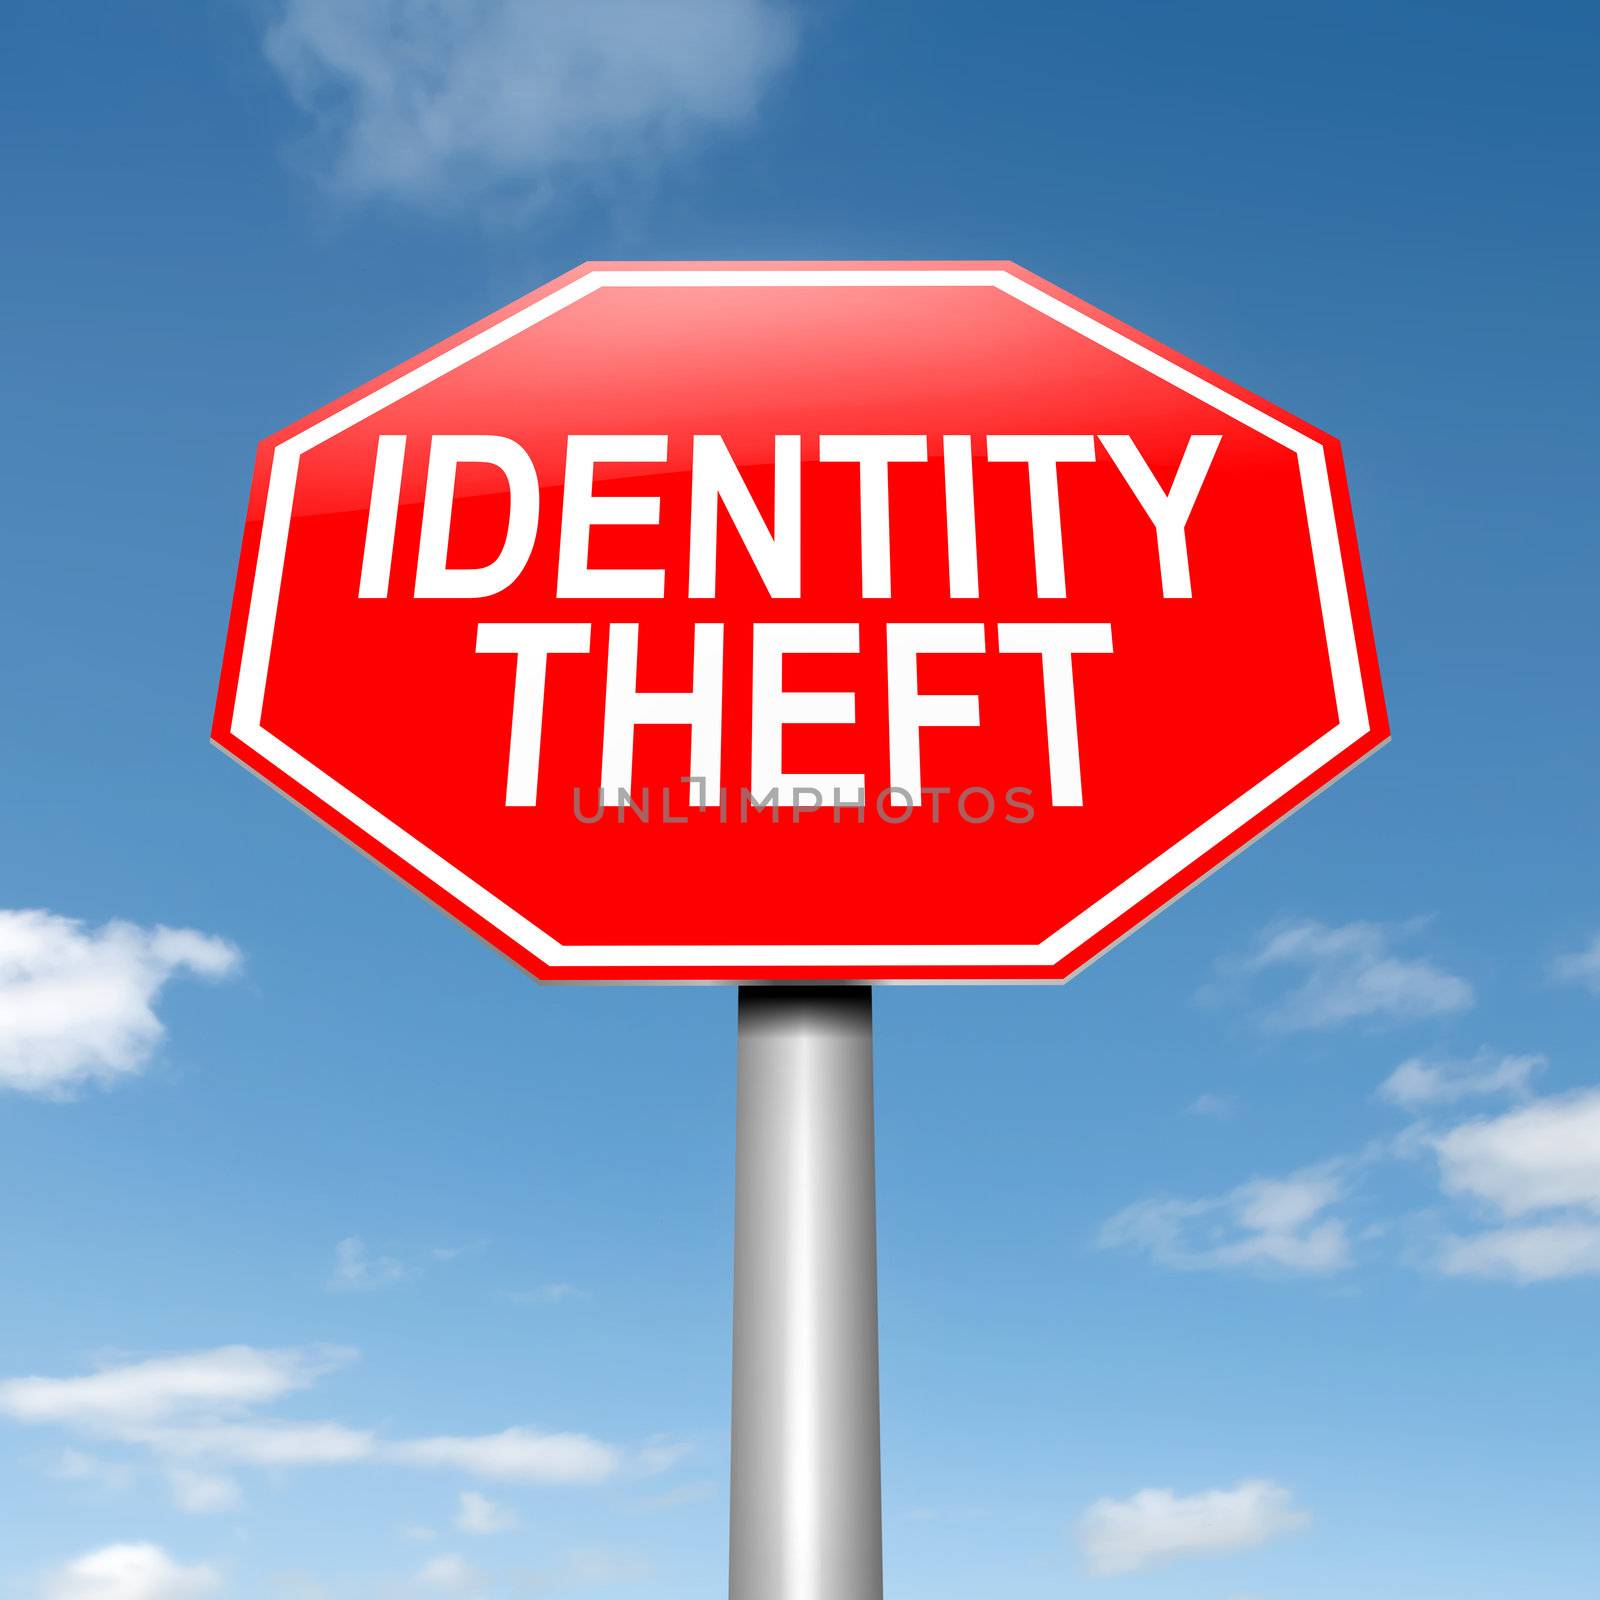 Illustration depicting a roadsign with an identity theft concept. Sky background.